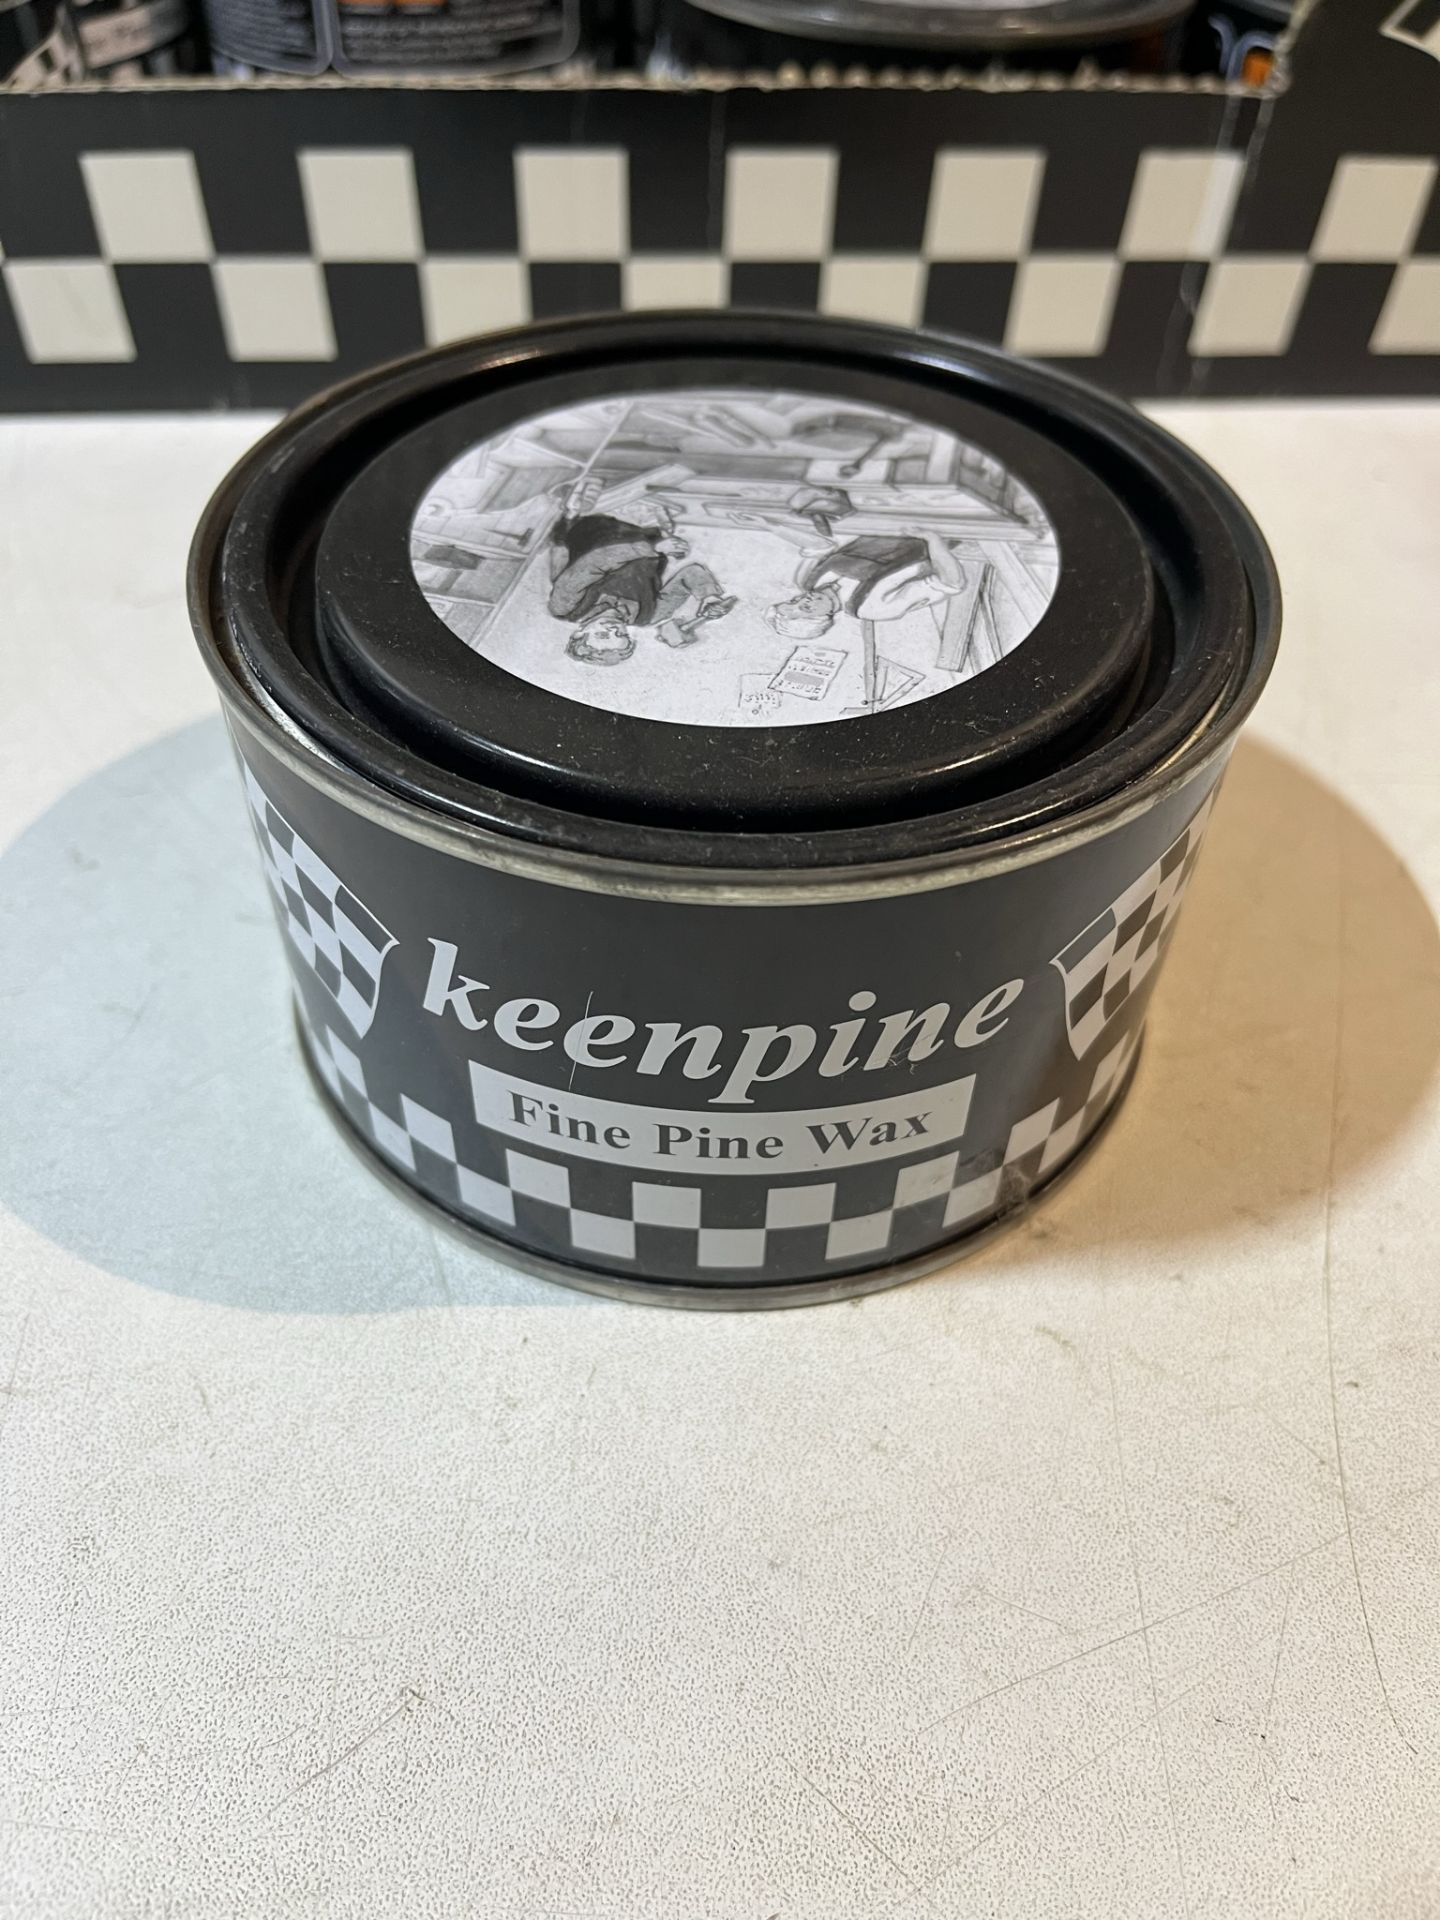 11 x Cans Of Keenpine Fine Pine Wax - Image 2 of 3